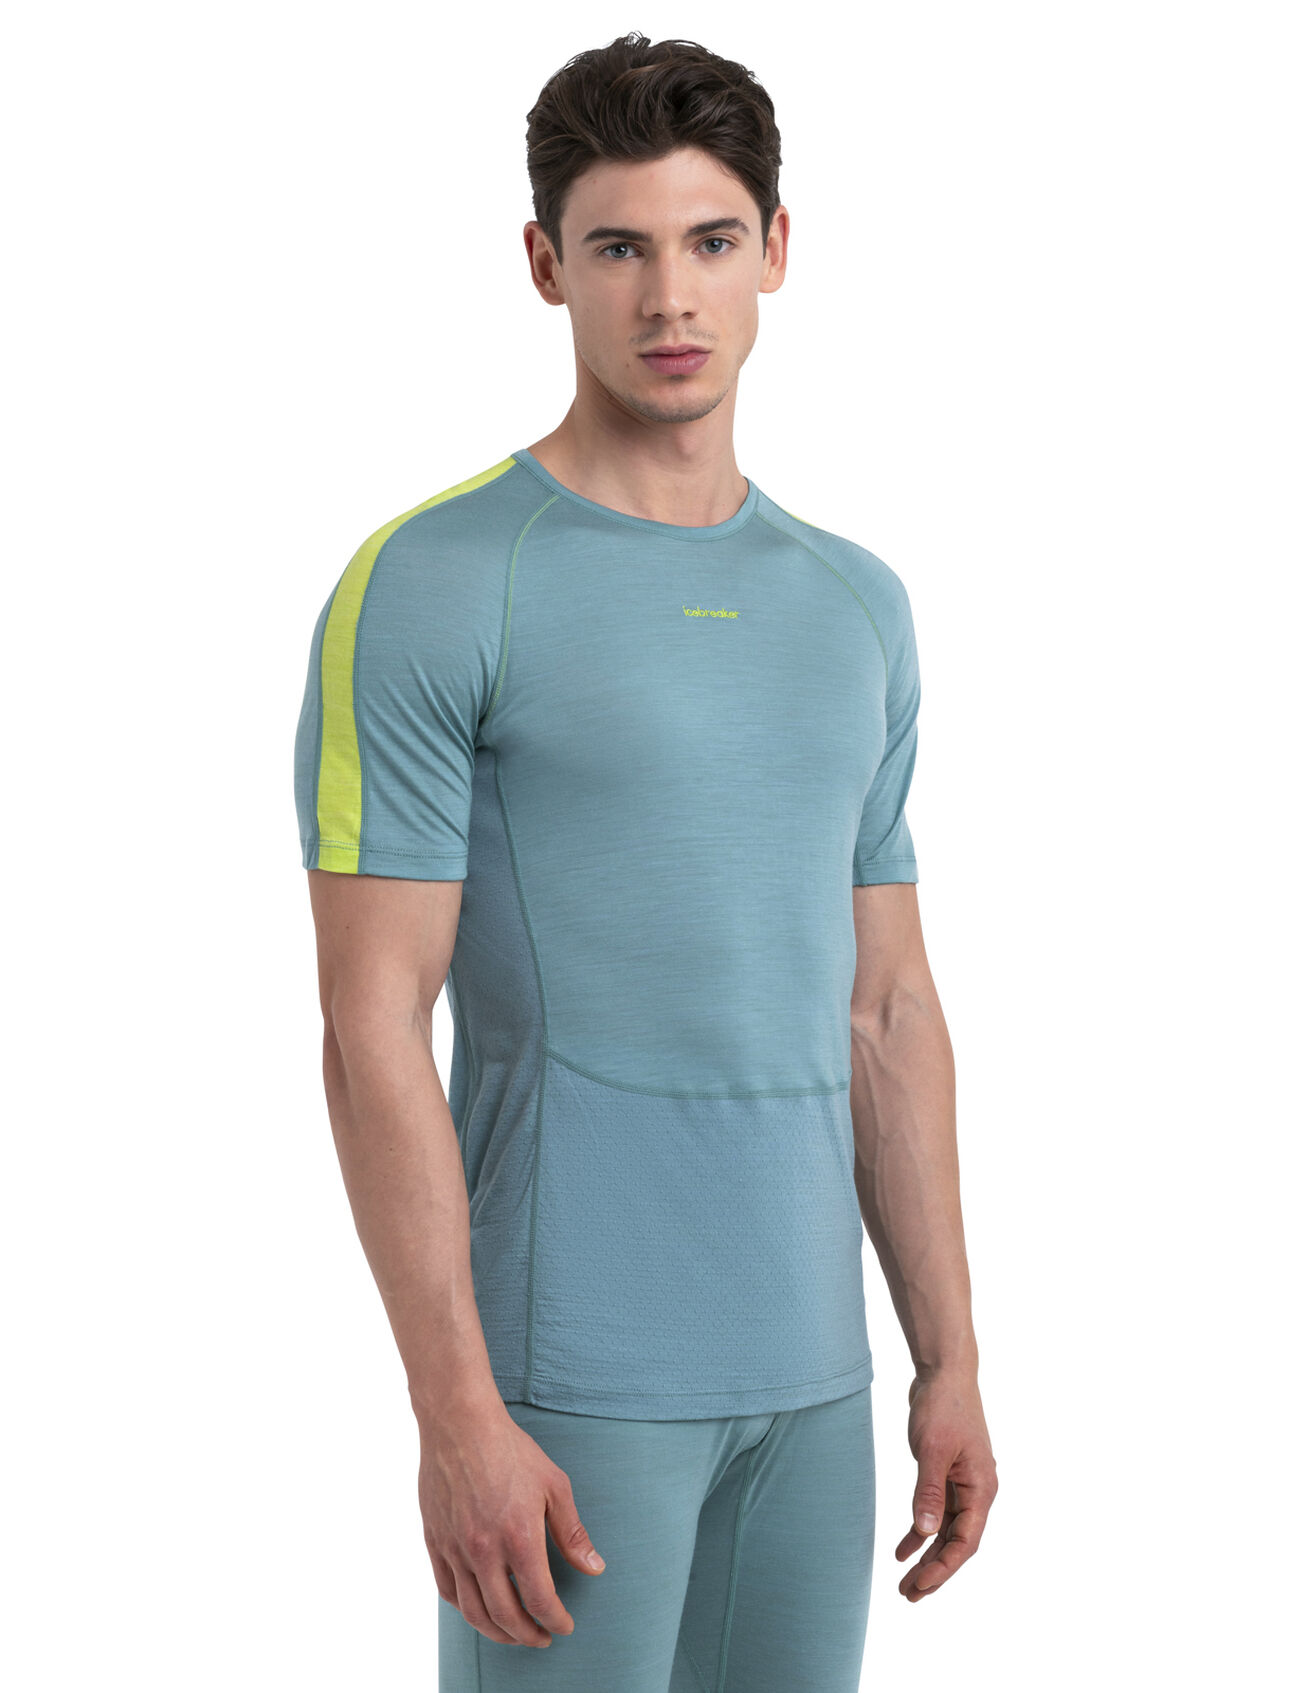 Mens 125 ZoneKnit™ Merino Blend Short Sleeve Crewe Thermal Top An ultralight merino base layer top designed to help regulate body temperature during high-intensity activity, the 125 ZoneKnit™ Short Sleeve Crewe features our jersey Cool-Lite™ fabric for adventure and everyday training.